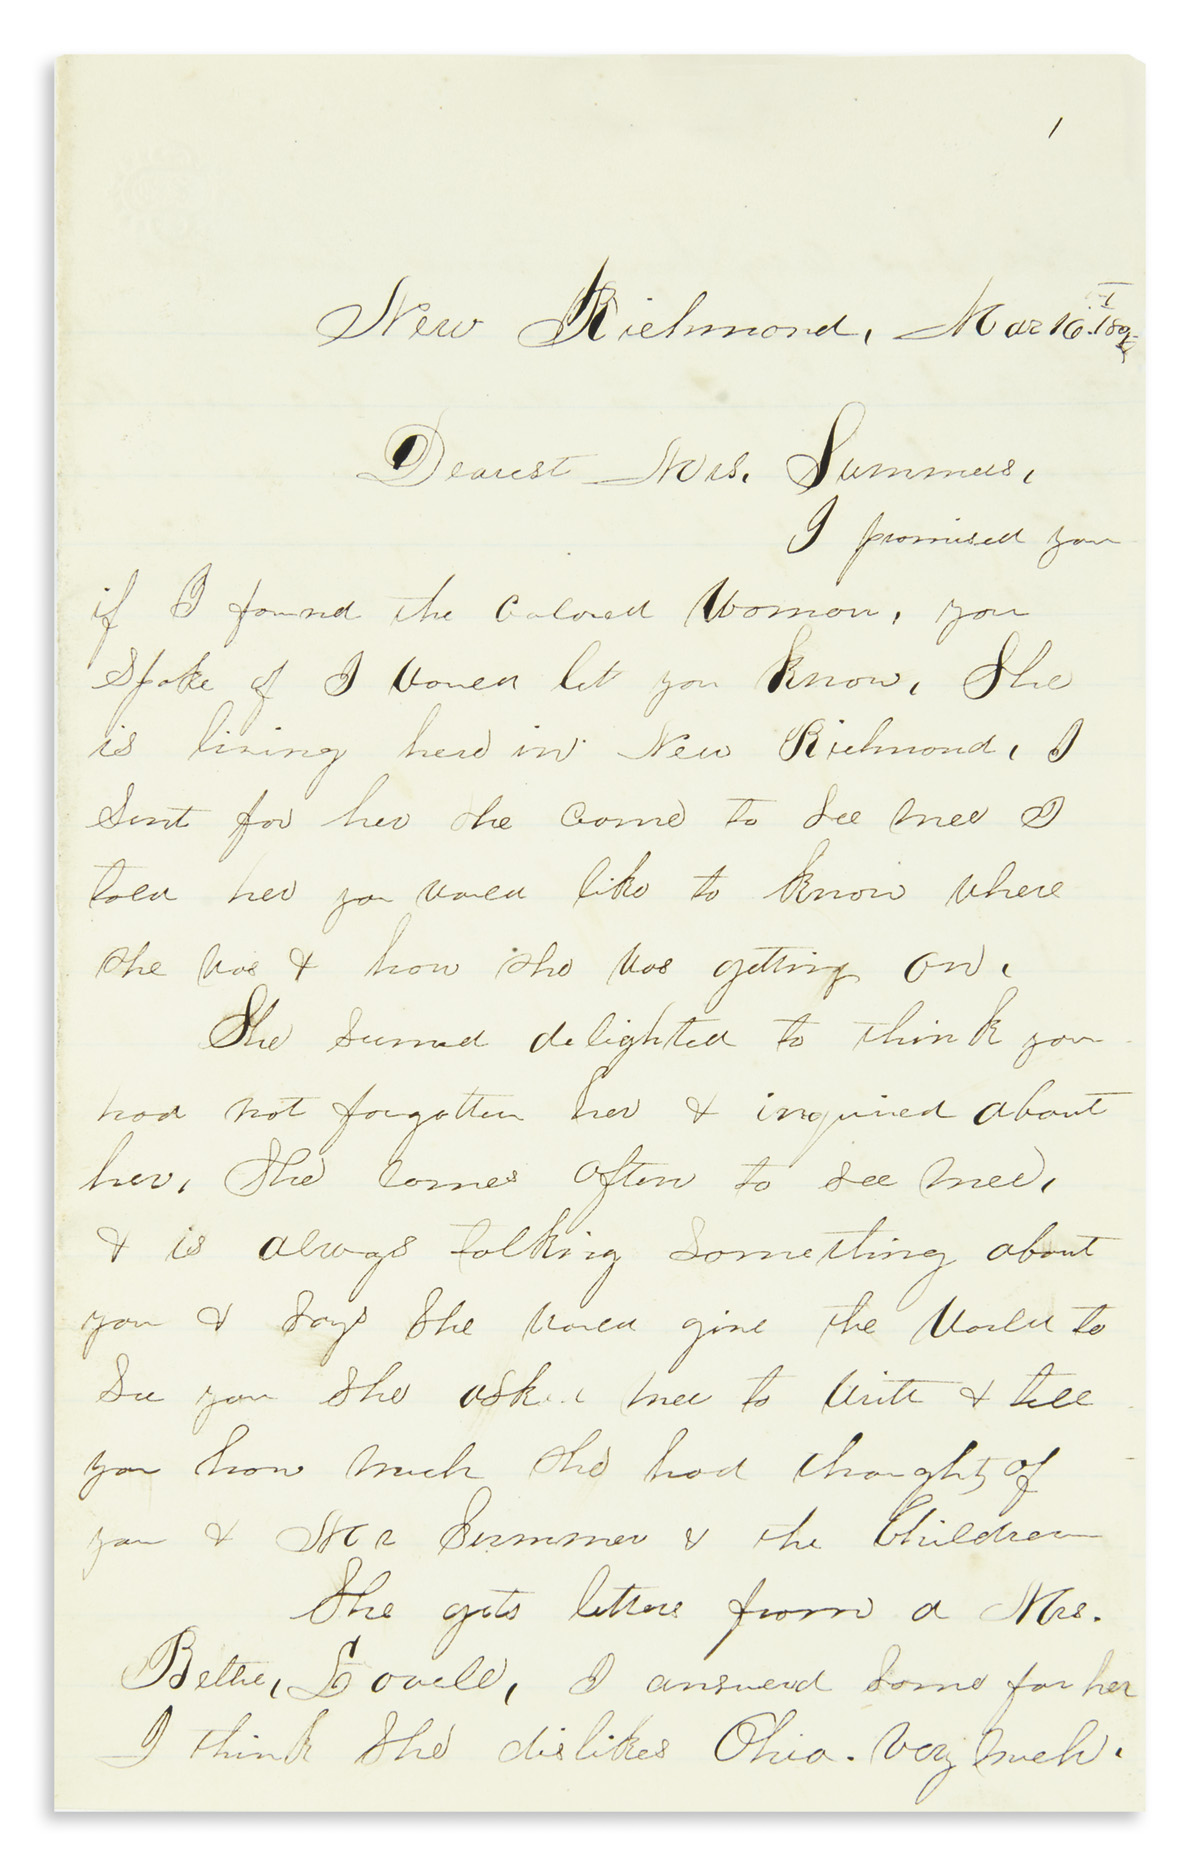 (SLAVERY AND ABOLITION.) Laidley[?], May. Letter describing a woman who allegedly says she does wish she was a slave again.